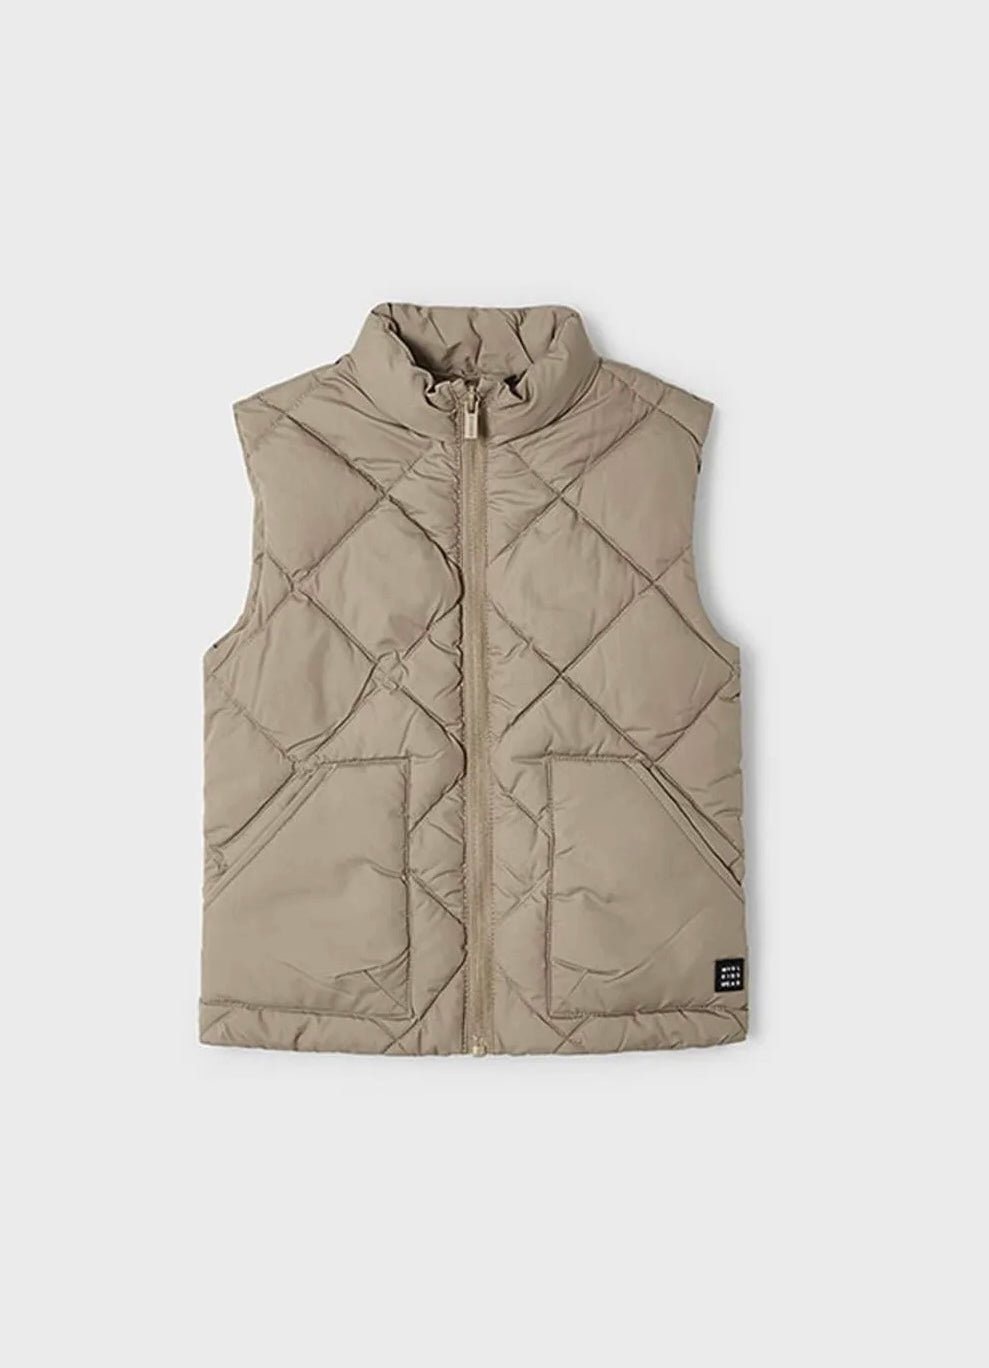 Mayoral Quilted Puffer Vest in Sand: Size 3 to 6 Years